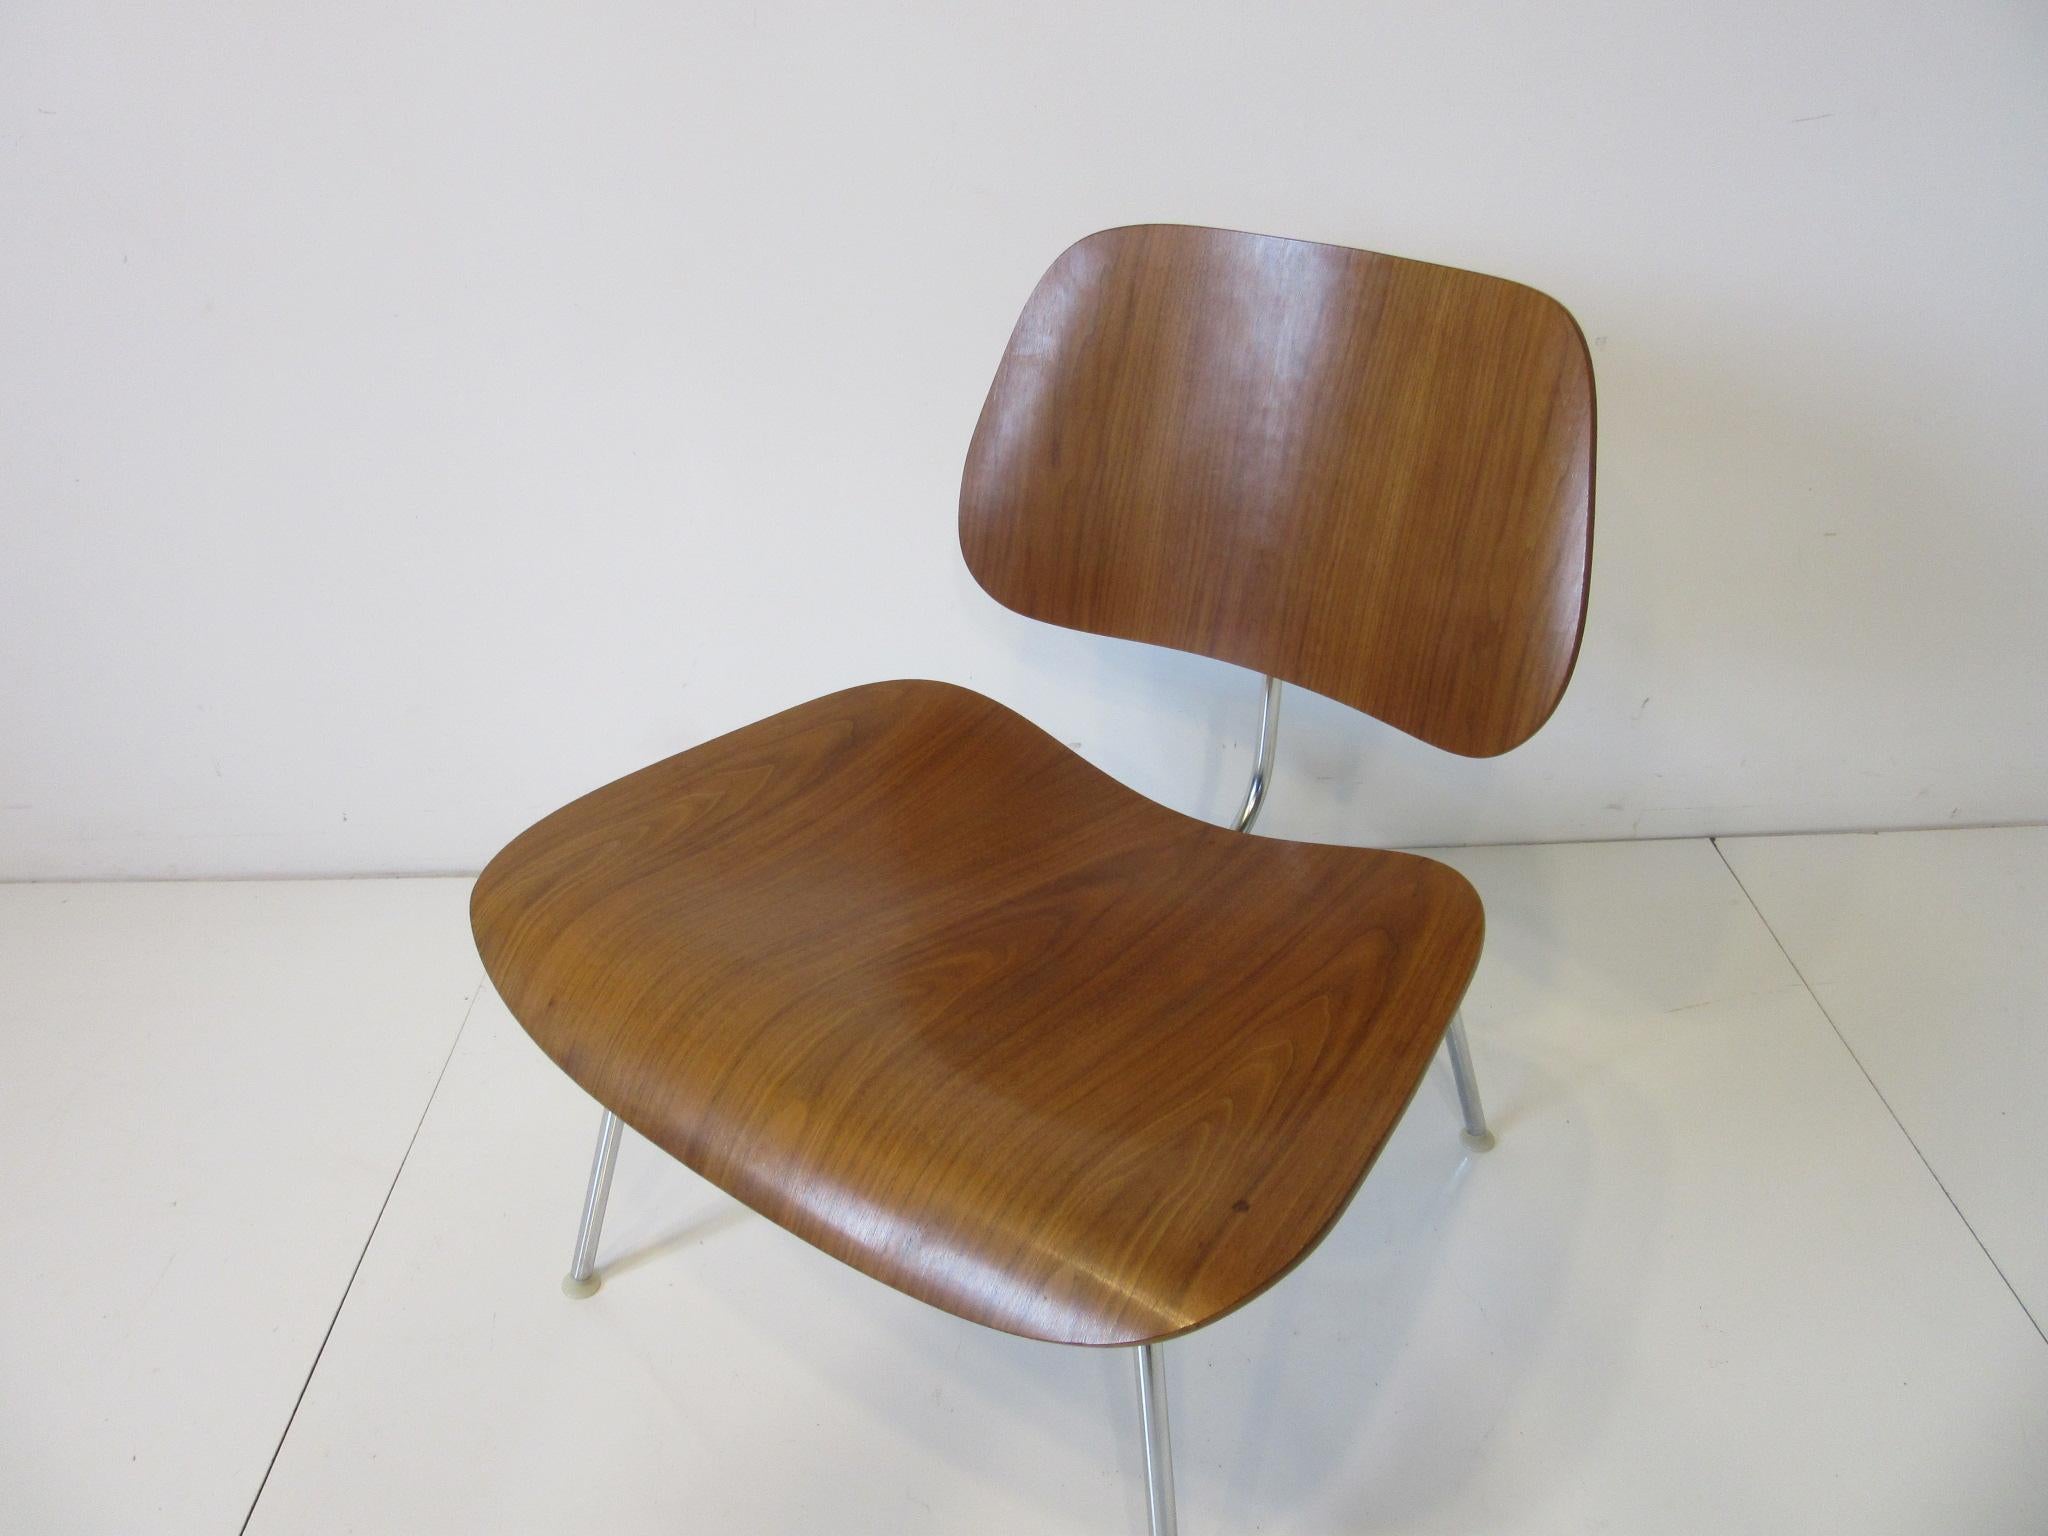 20th Century Eames Walnut LCM Lounge Chair with Chrome Frame for Herman Miller 'A'